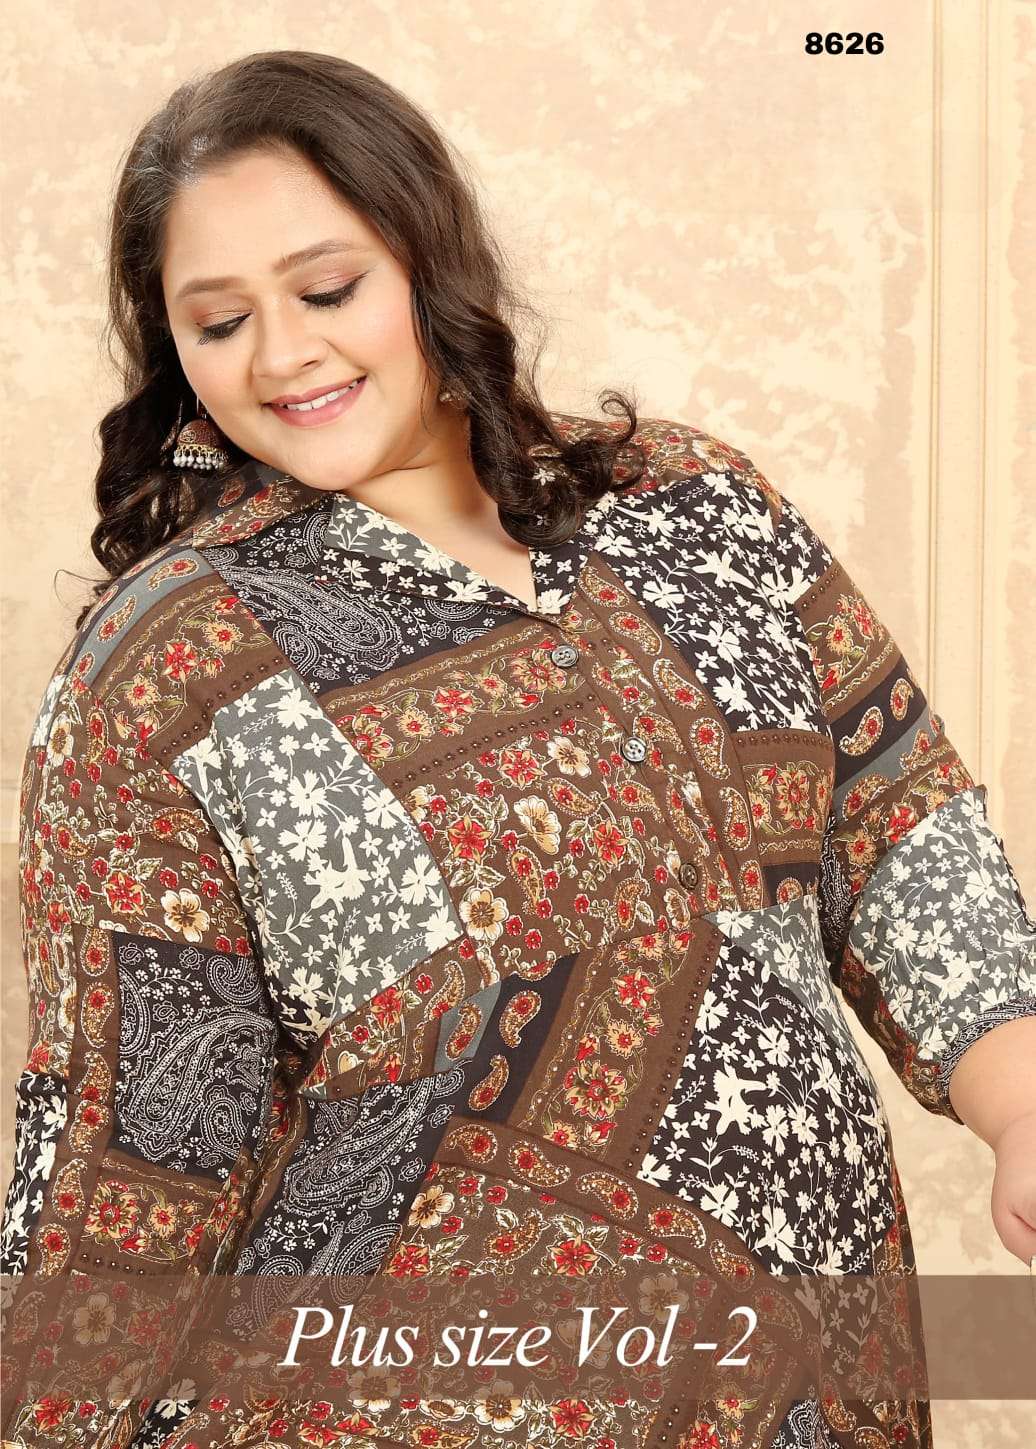 PLUS SIZE VOL 2 PREMIUM RAYON EXPORT QUALITY LONG  KURTI BY S3FOREVER BRAND WHOLESALER AND DEAER